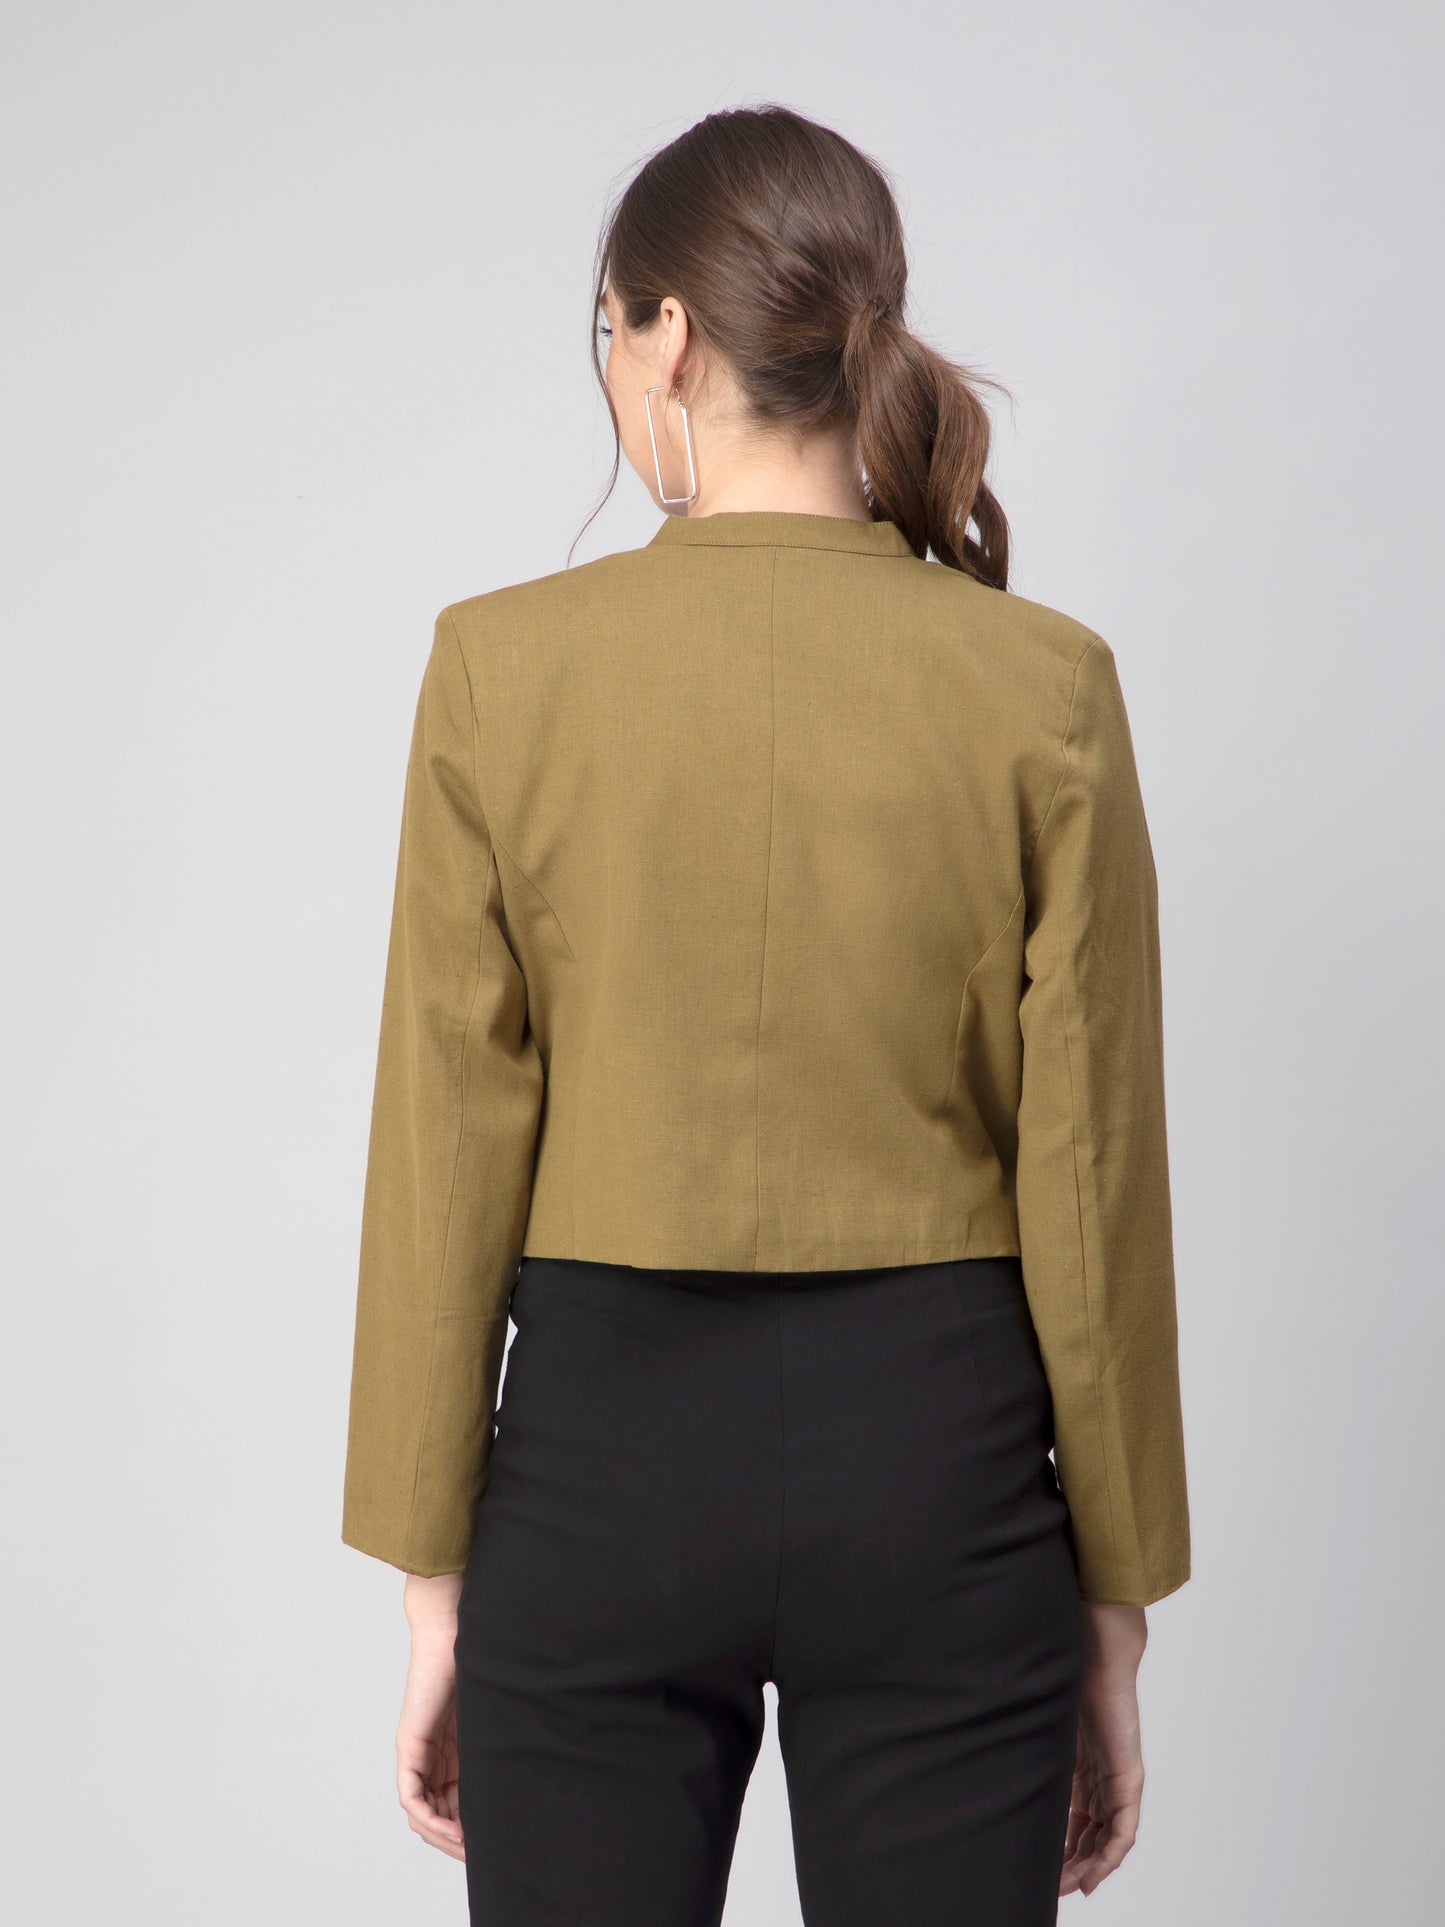 The view from back of  Green Blazer In Pure Cotton, formal office wear for women